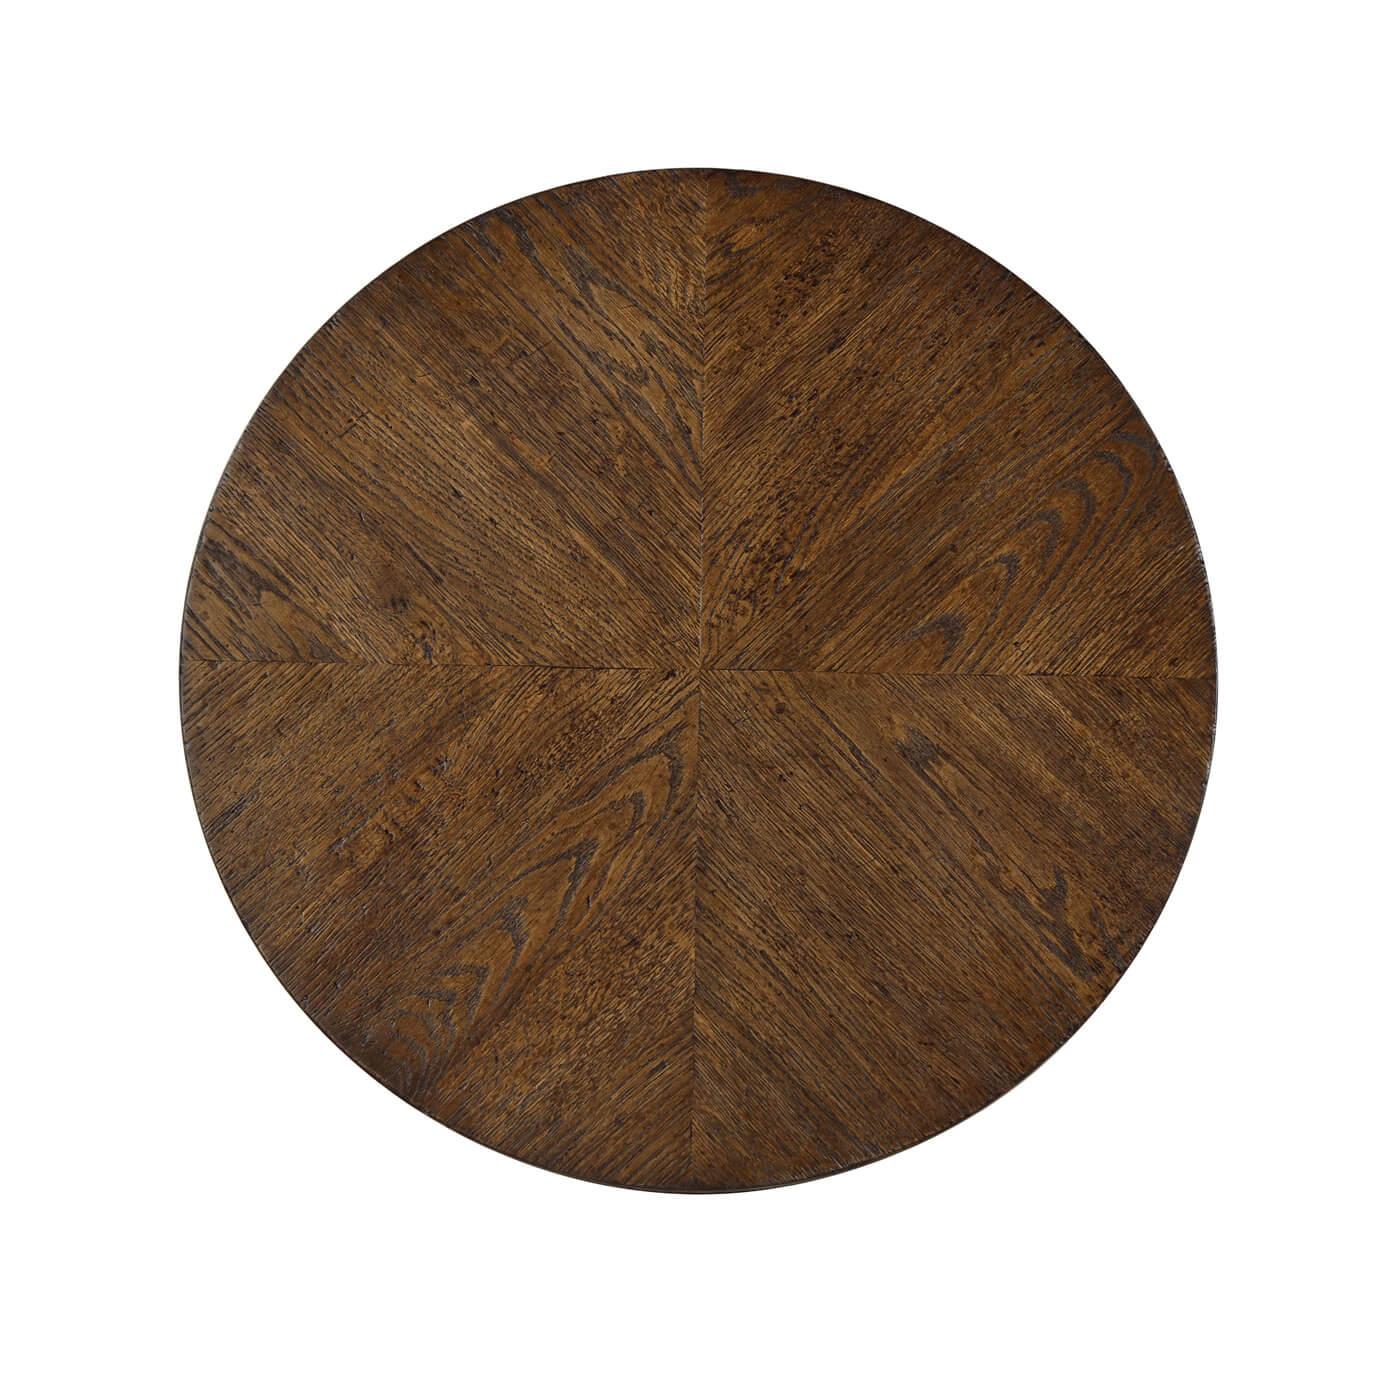 A modern rustic oak round end table with a geometrically arranged oak pattern on the round top. This beautiful table is crafted with a flat truss oak stretcher and a tapered oak leg.

Shown in Dusk finish
Dimensions
22